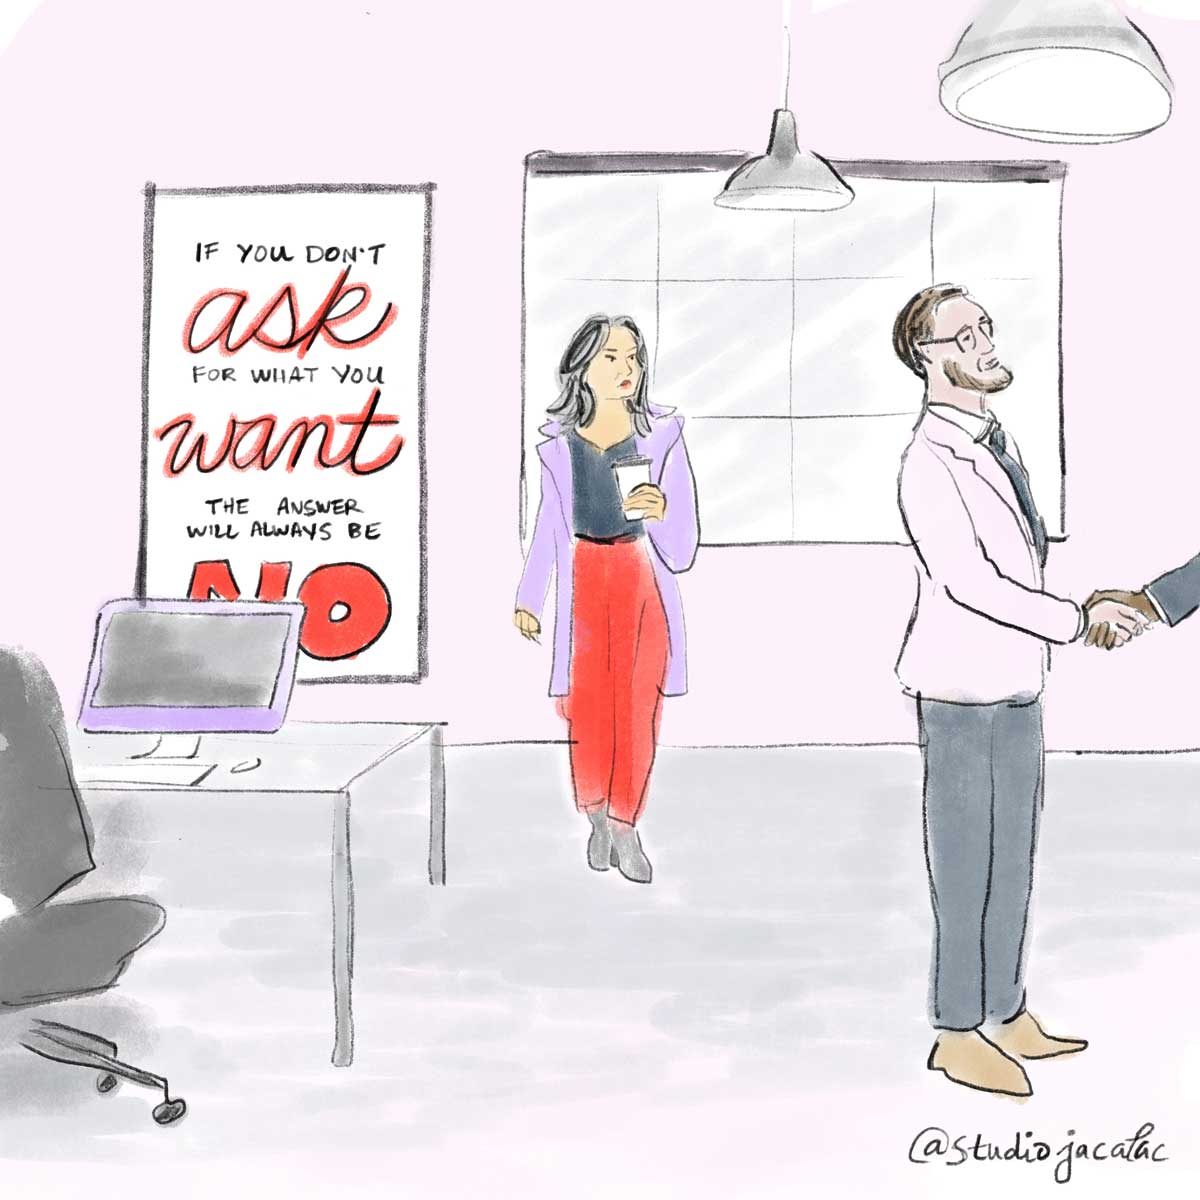 An illustration of a woman in an office looking askance at a man shaking hands with another man out of the frame. A poster behind her reads, "If you don't ask for what you want, the answer will always be no."